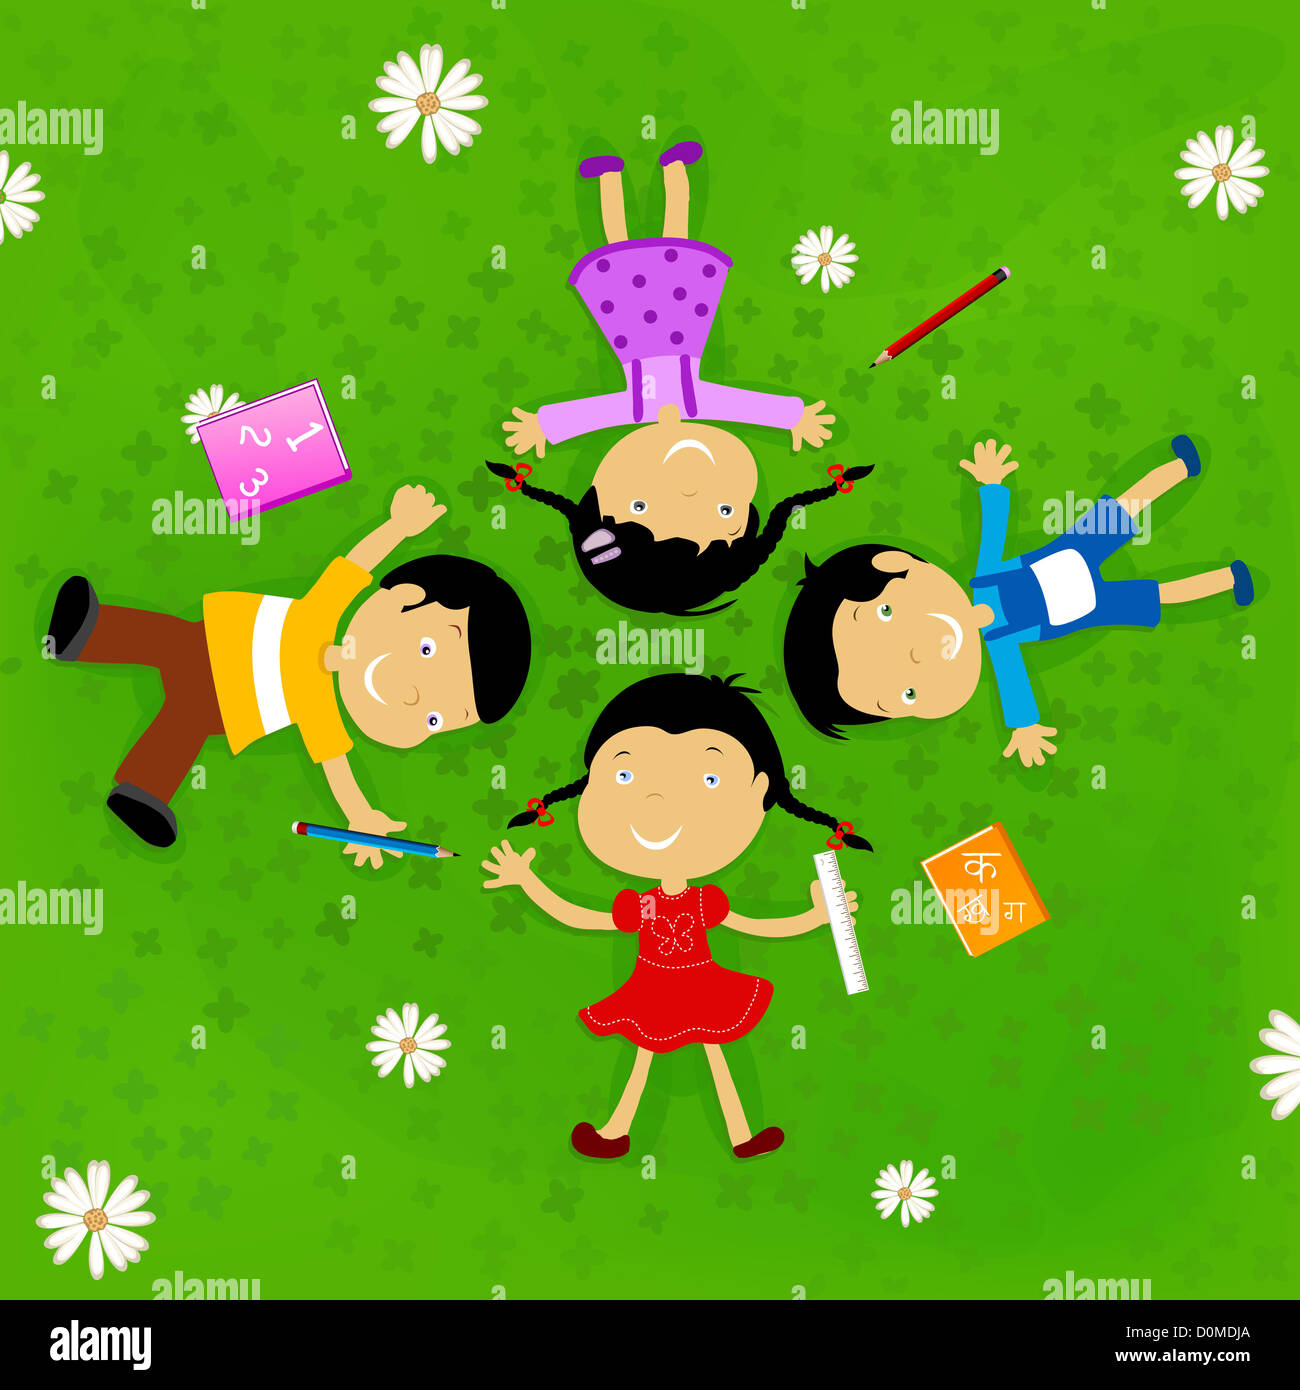 School Friends Growing Up Together Set. Cute Boys And Girls From Kids To  Teenagers. Cycle Of Life, Growing Up Cartoon Vector Illustration Royalty  Free SVG, Cliparts, Vectors, and Stock Illustration. Image 199177370.